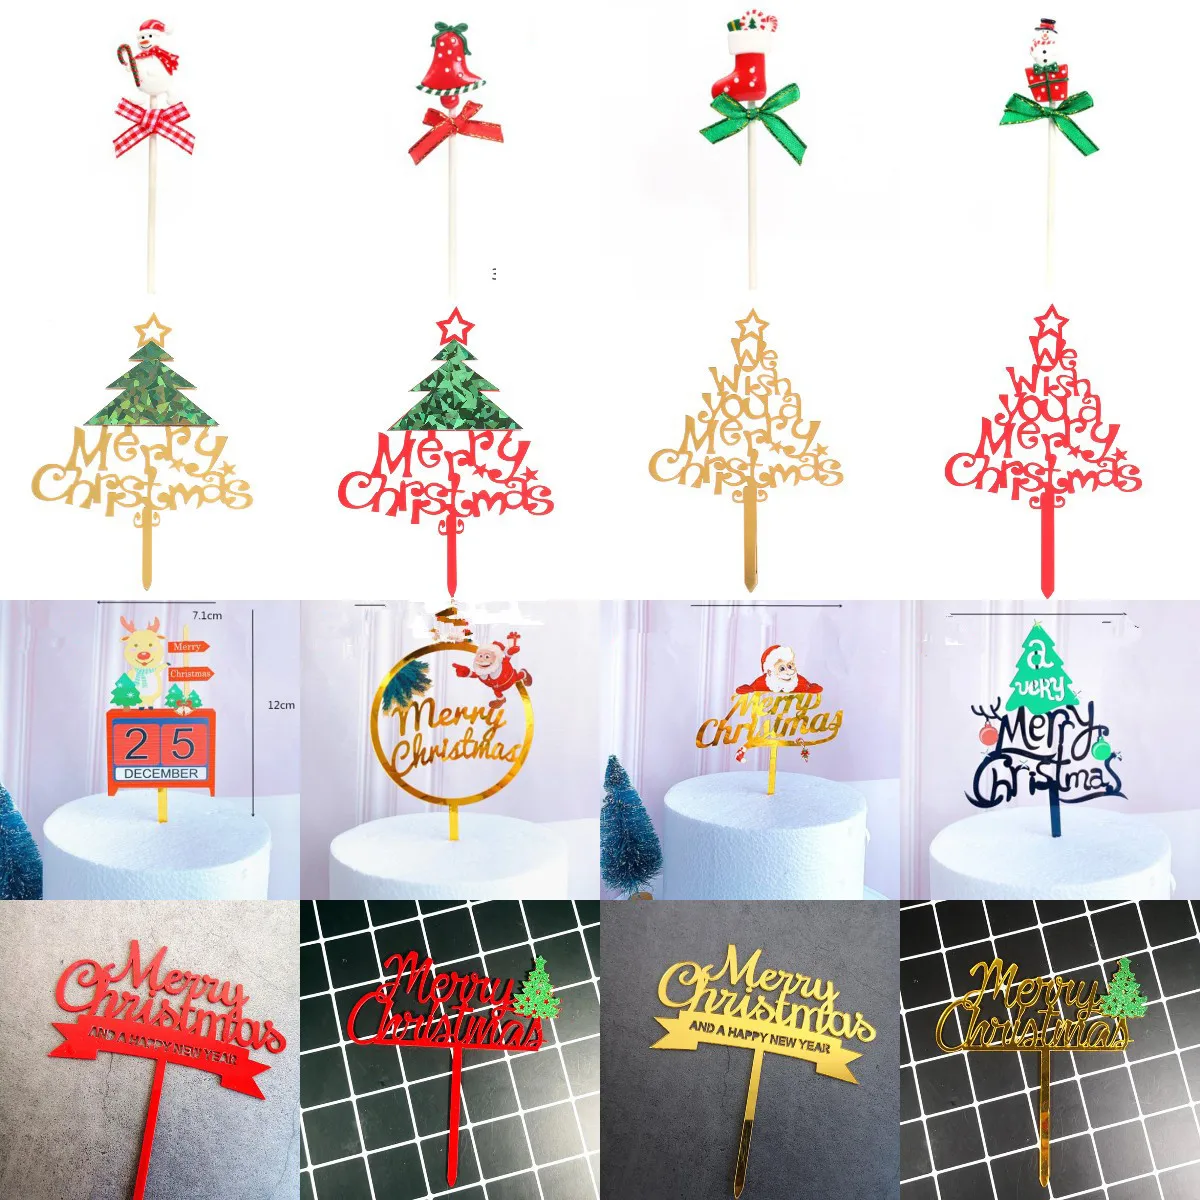 Santa Claus Cake Topper Flags Gillter Cake Topper Kids Happy Birthday Wedding Baby Shower Party Baking DIY Merry Christmas Decor